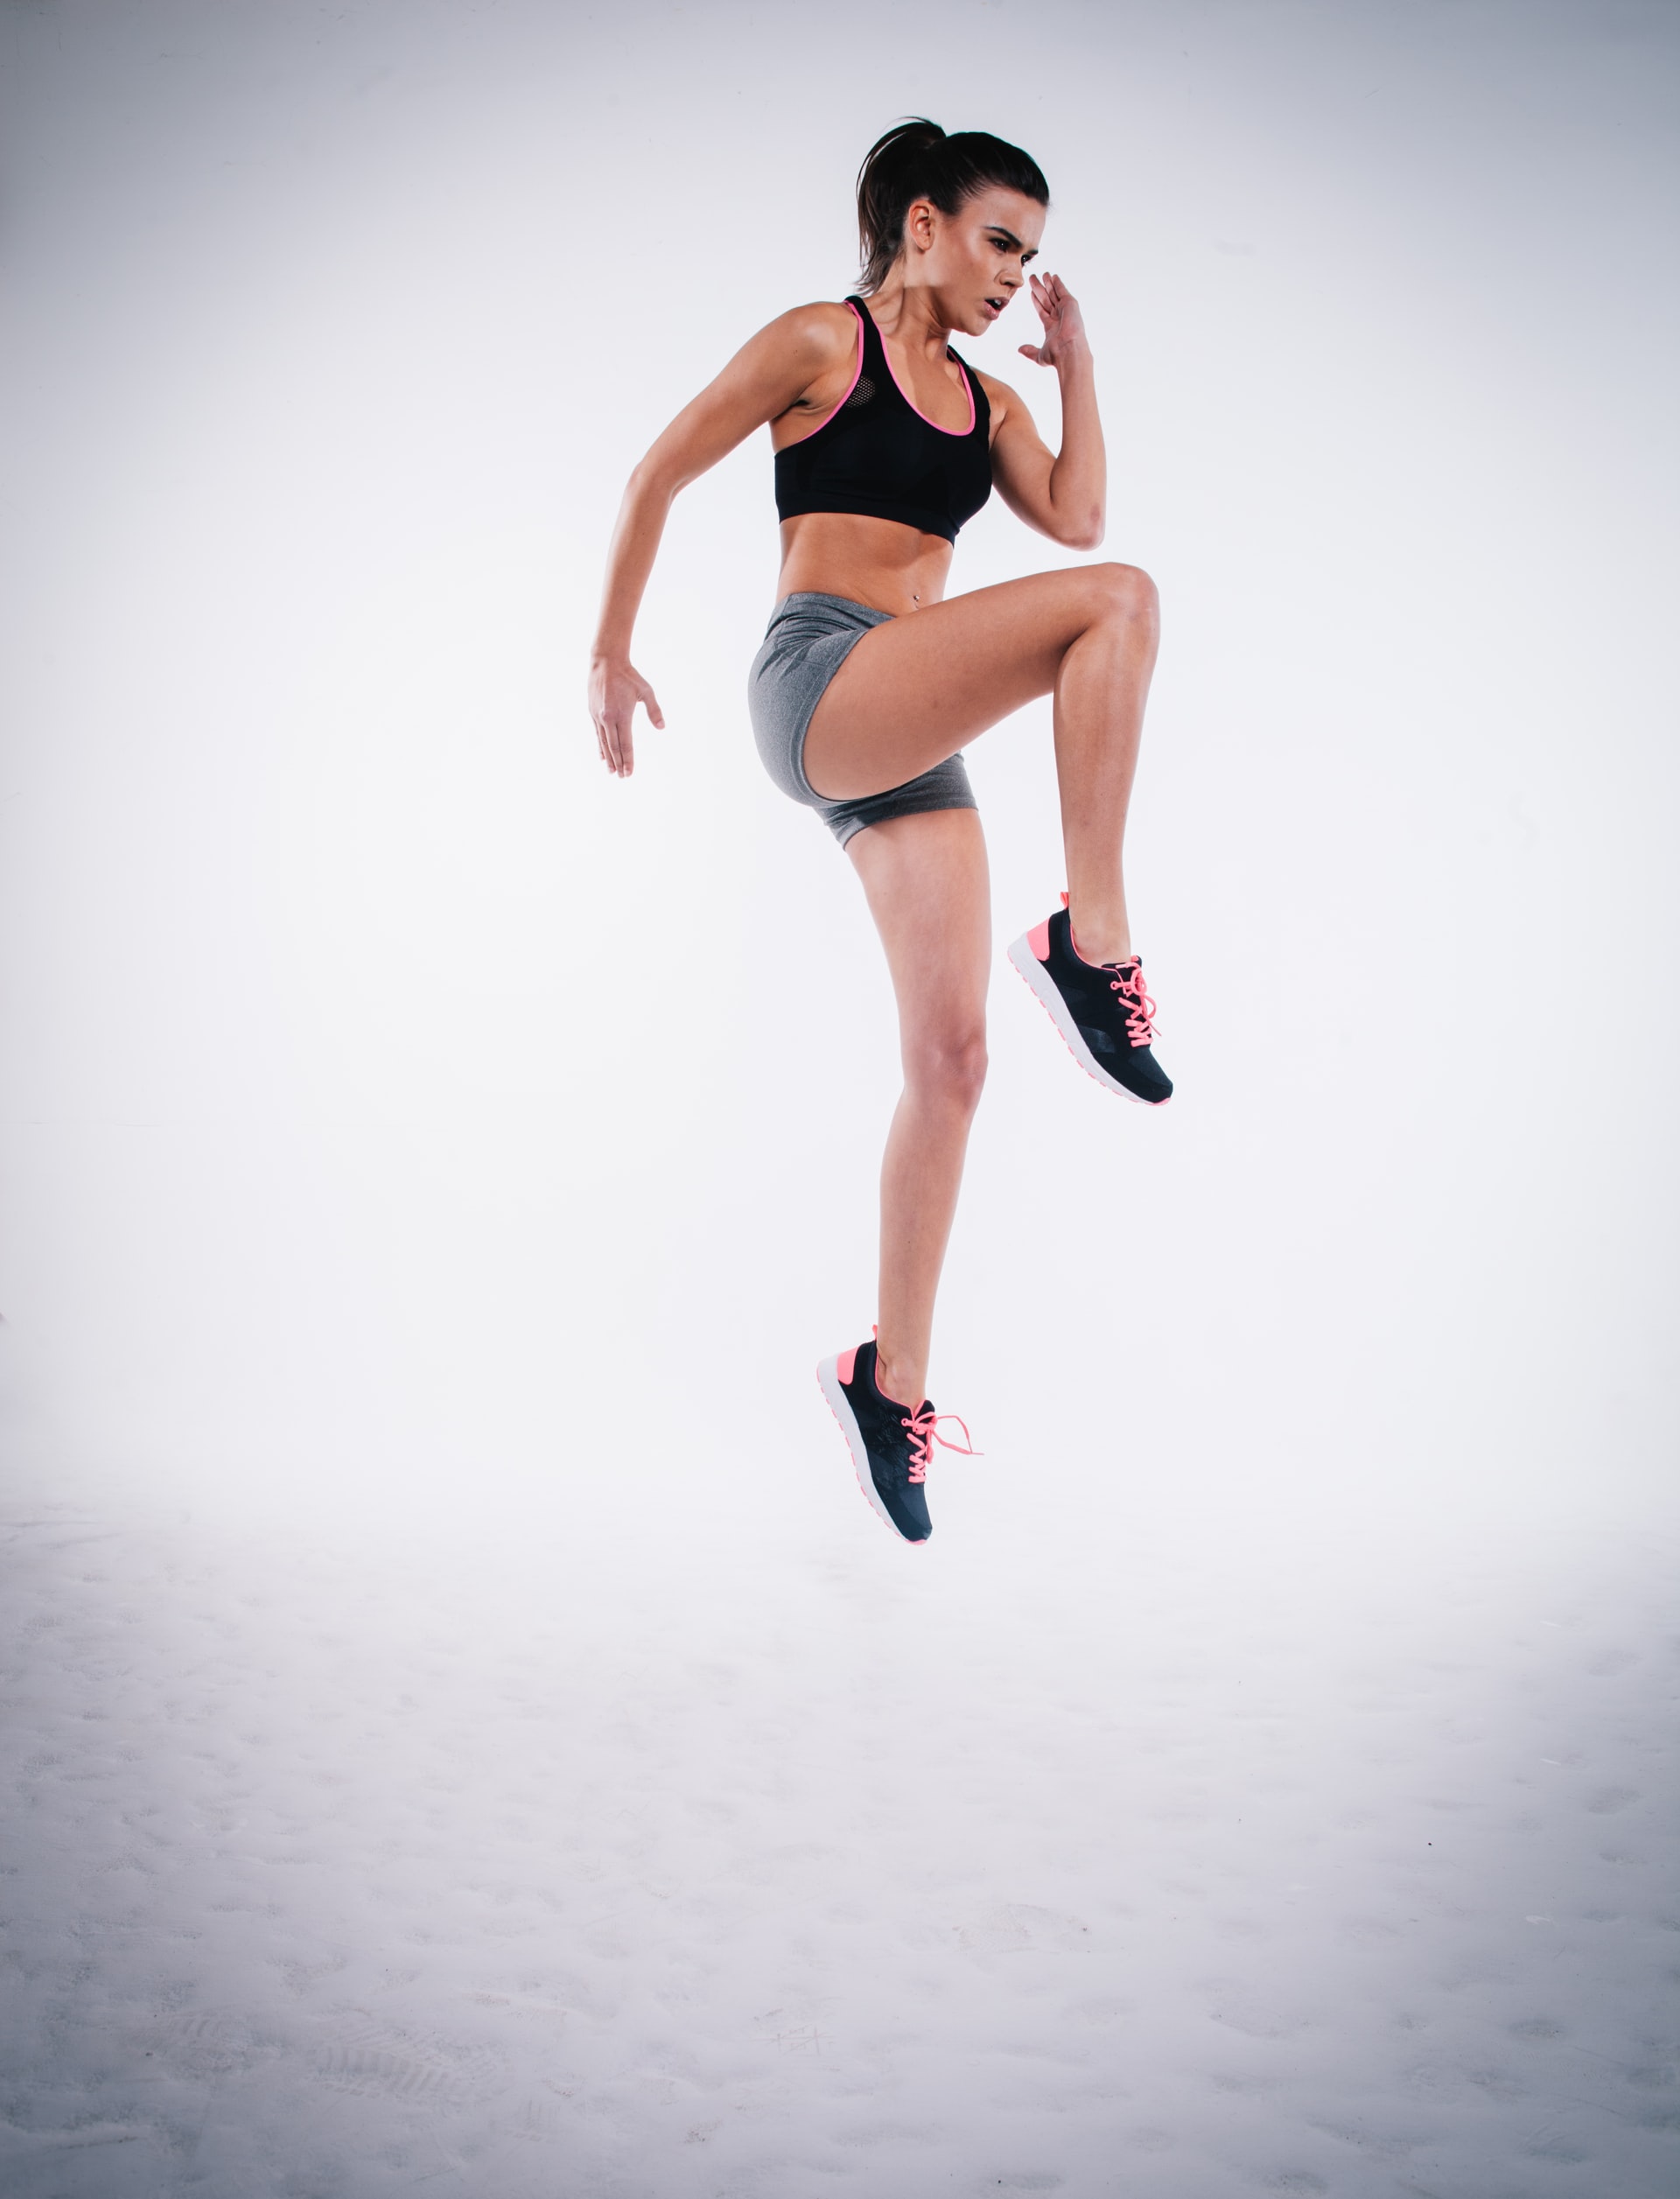 A woman jumping during workout